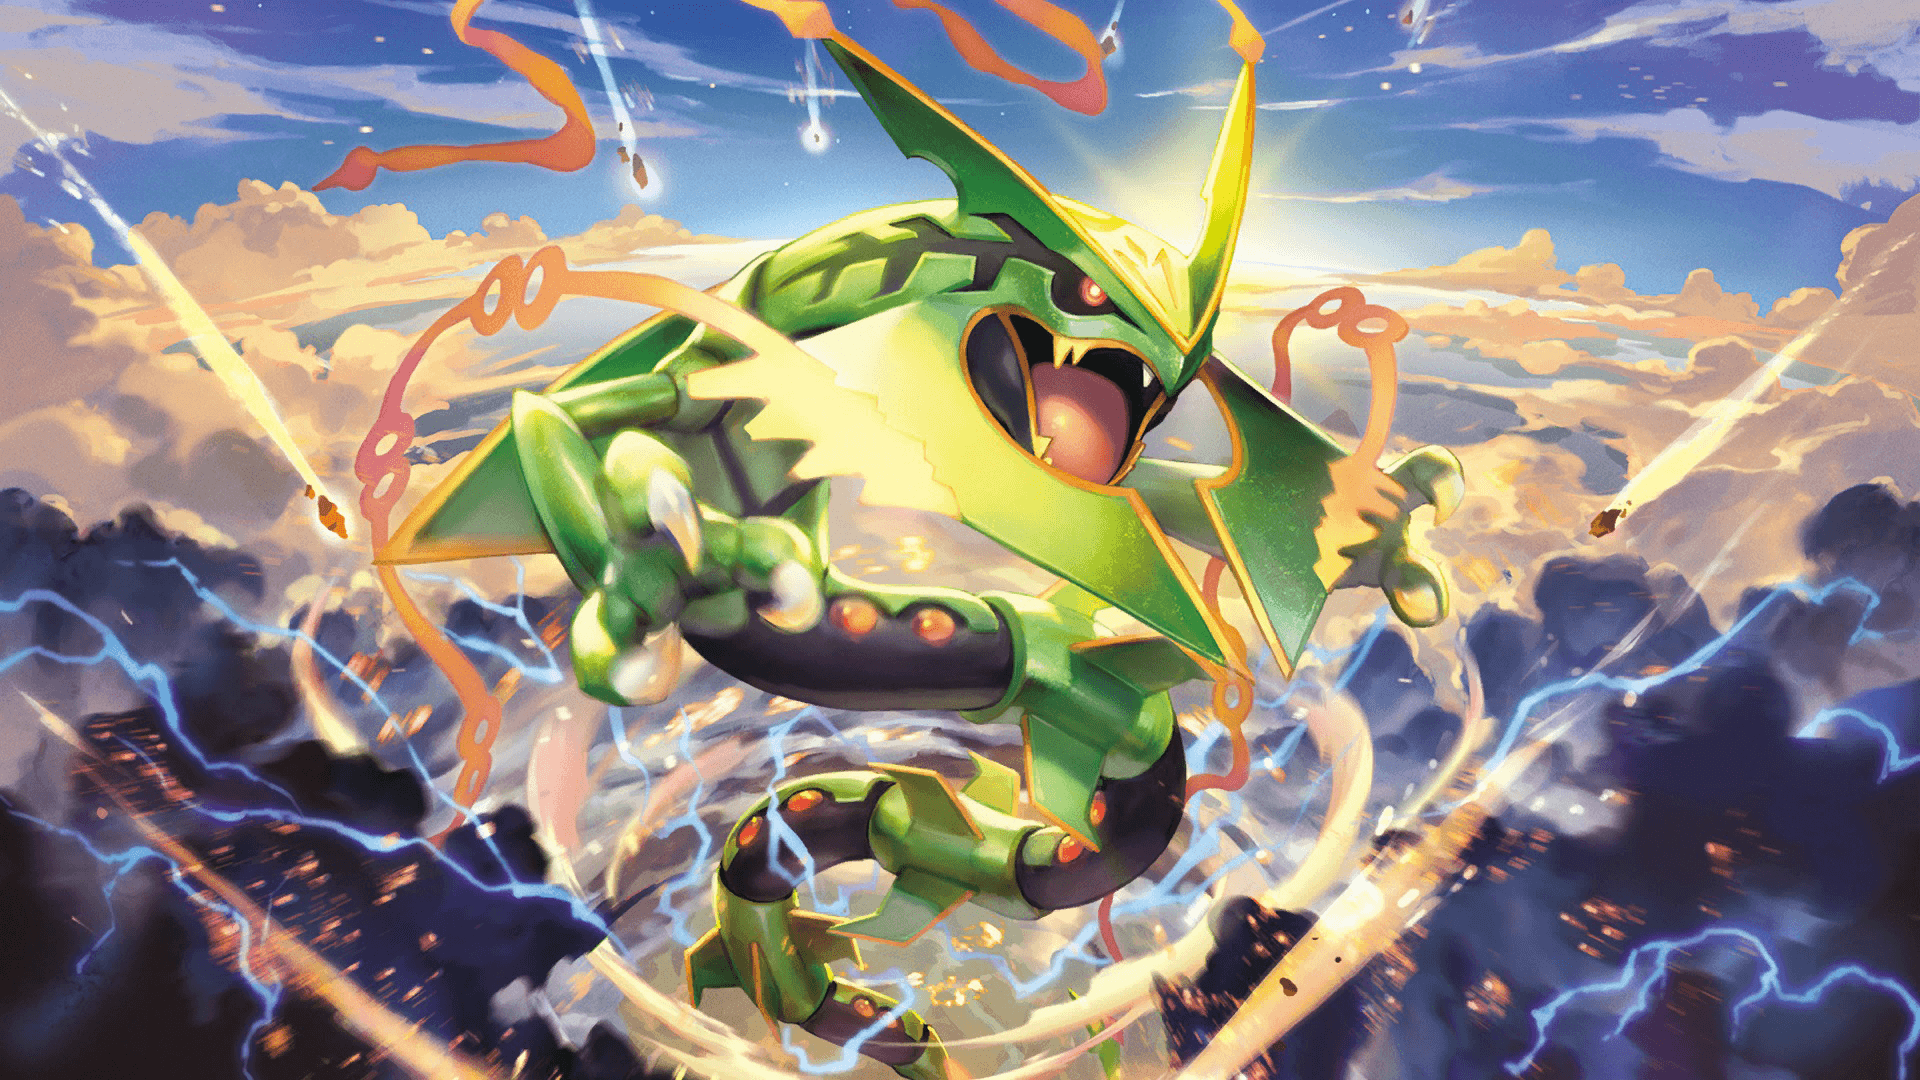 Mega Rayquaza Wallpapers Full HD Wallpapers and Backgrounds Image.